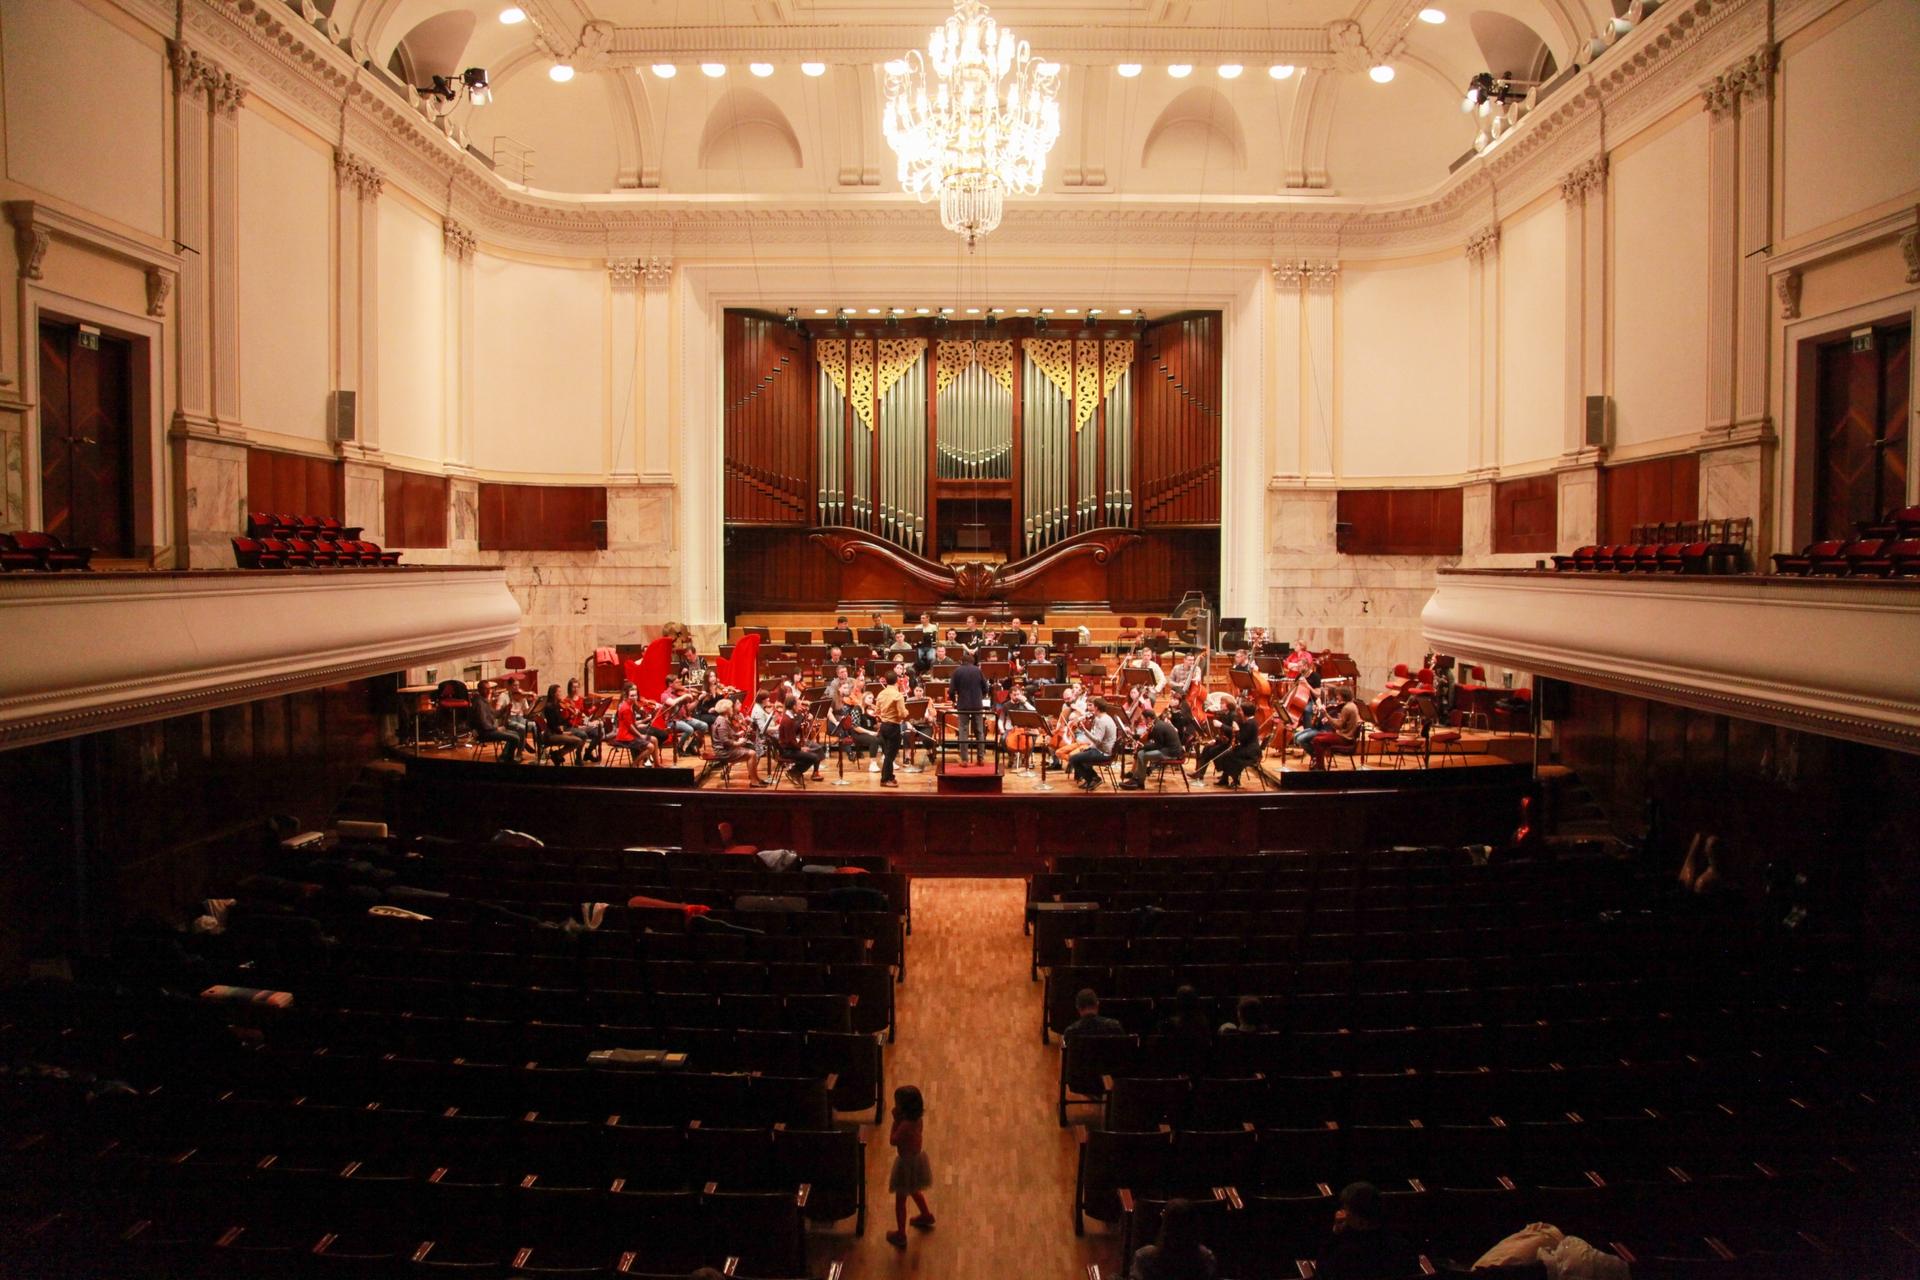 The Kyiv Symphony Orchestra rehearses at the National Philharmonic in Warsaw, Poland